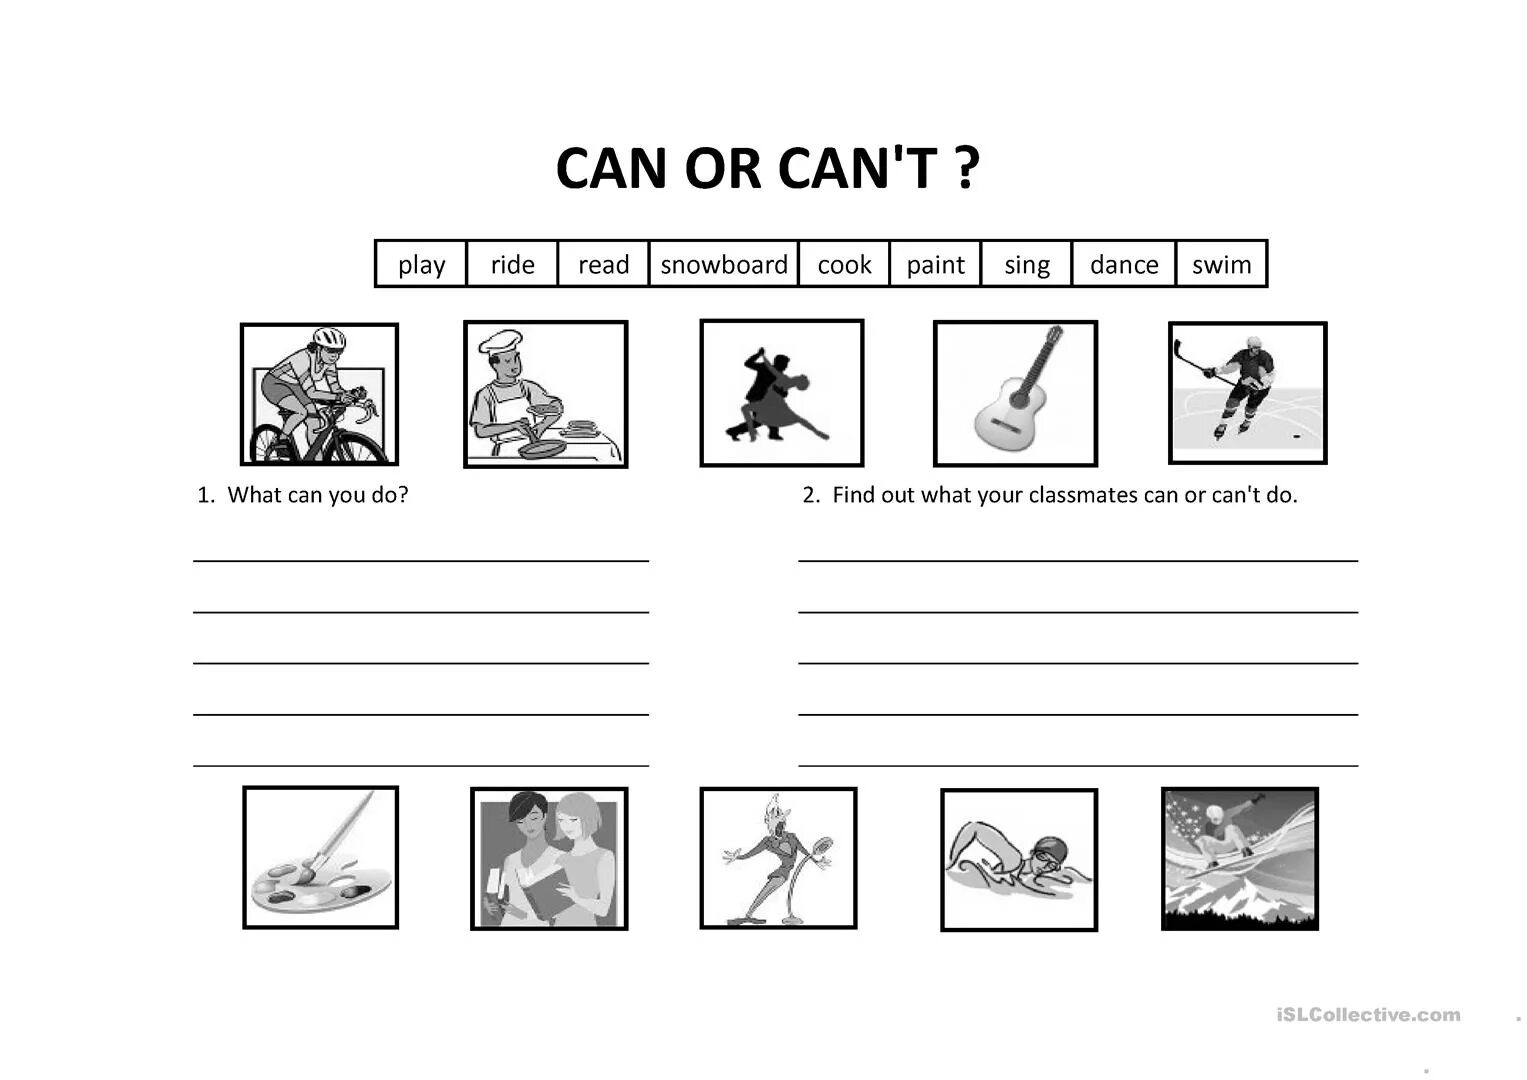 Can упражнения Worksheet. Глагол can Worksheets. Рабочий лист can. Модальные глаголы can could Worksheets. Activities i can